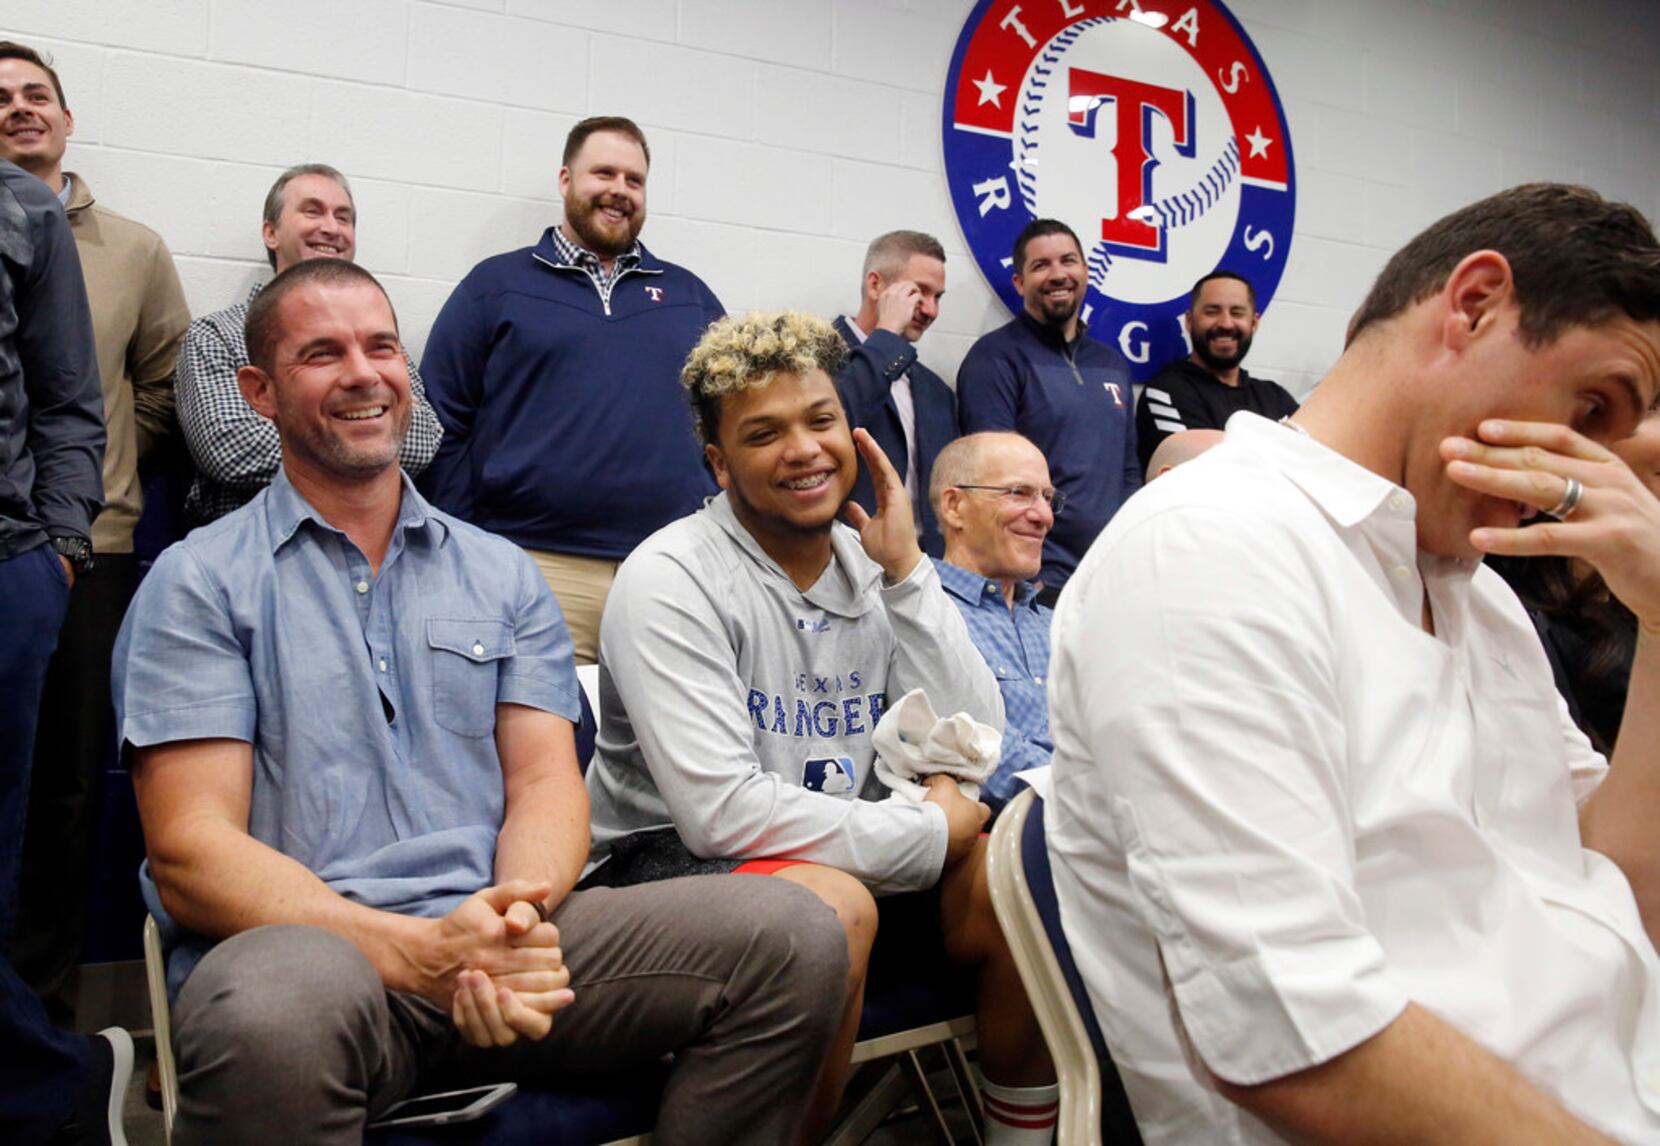 A mannequin wears the jersey of retired Texas Rangers player Michael Young  during a news conference in Arlington, Texas, Tuesday, June 18, 2019. The  Rangers announced Tuesday that the team will retire